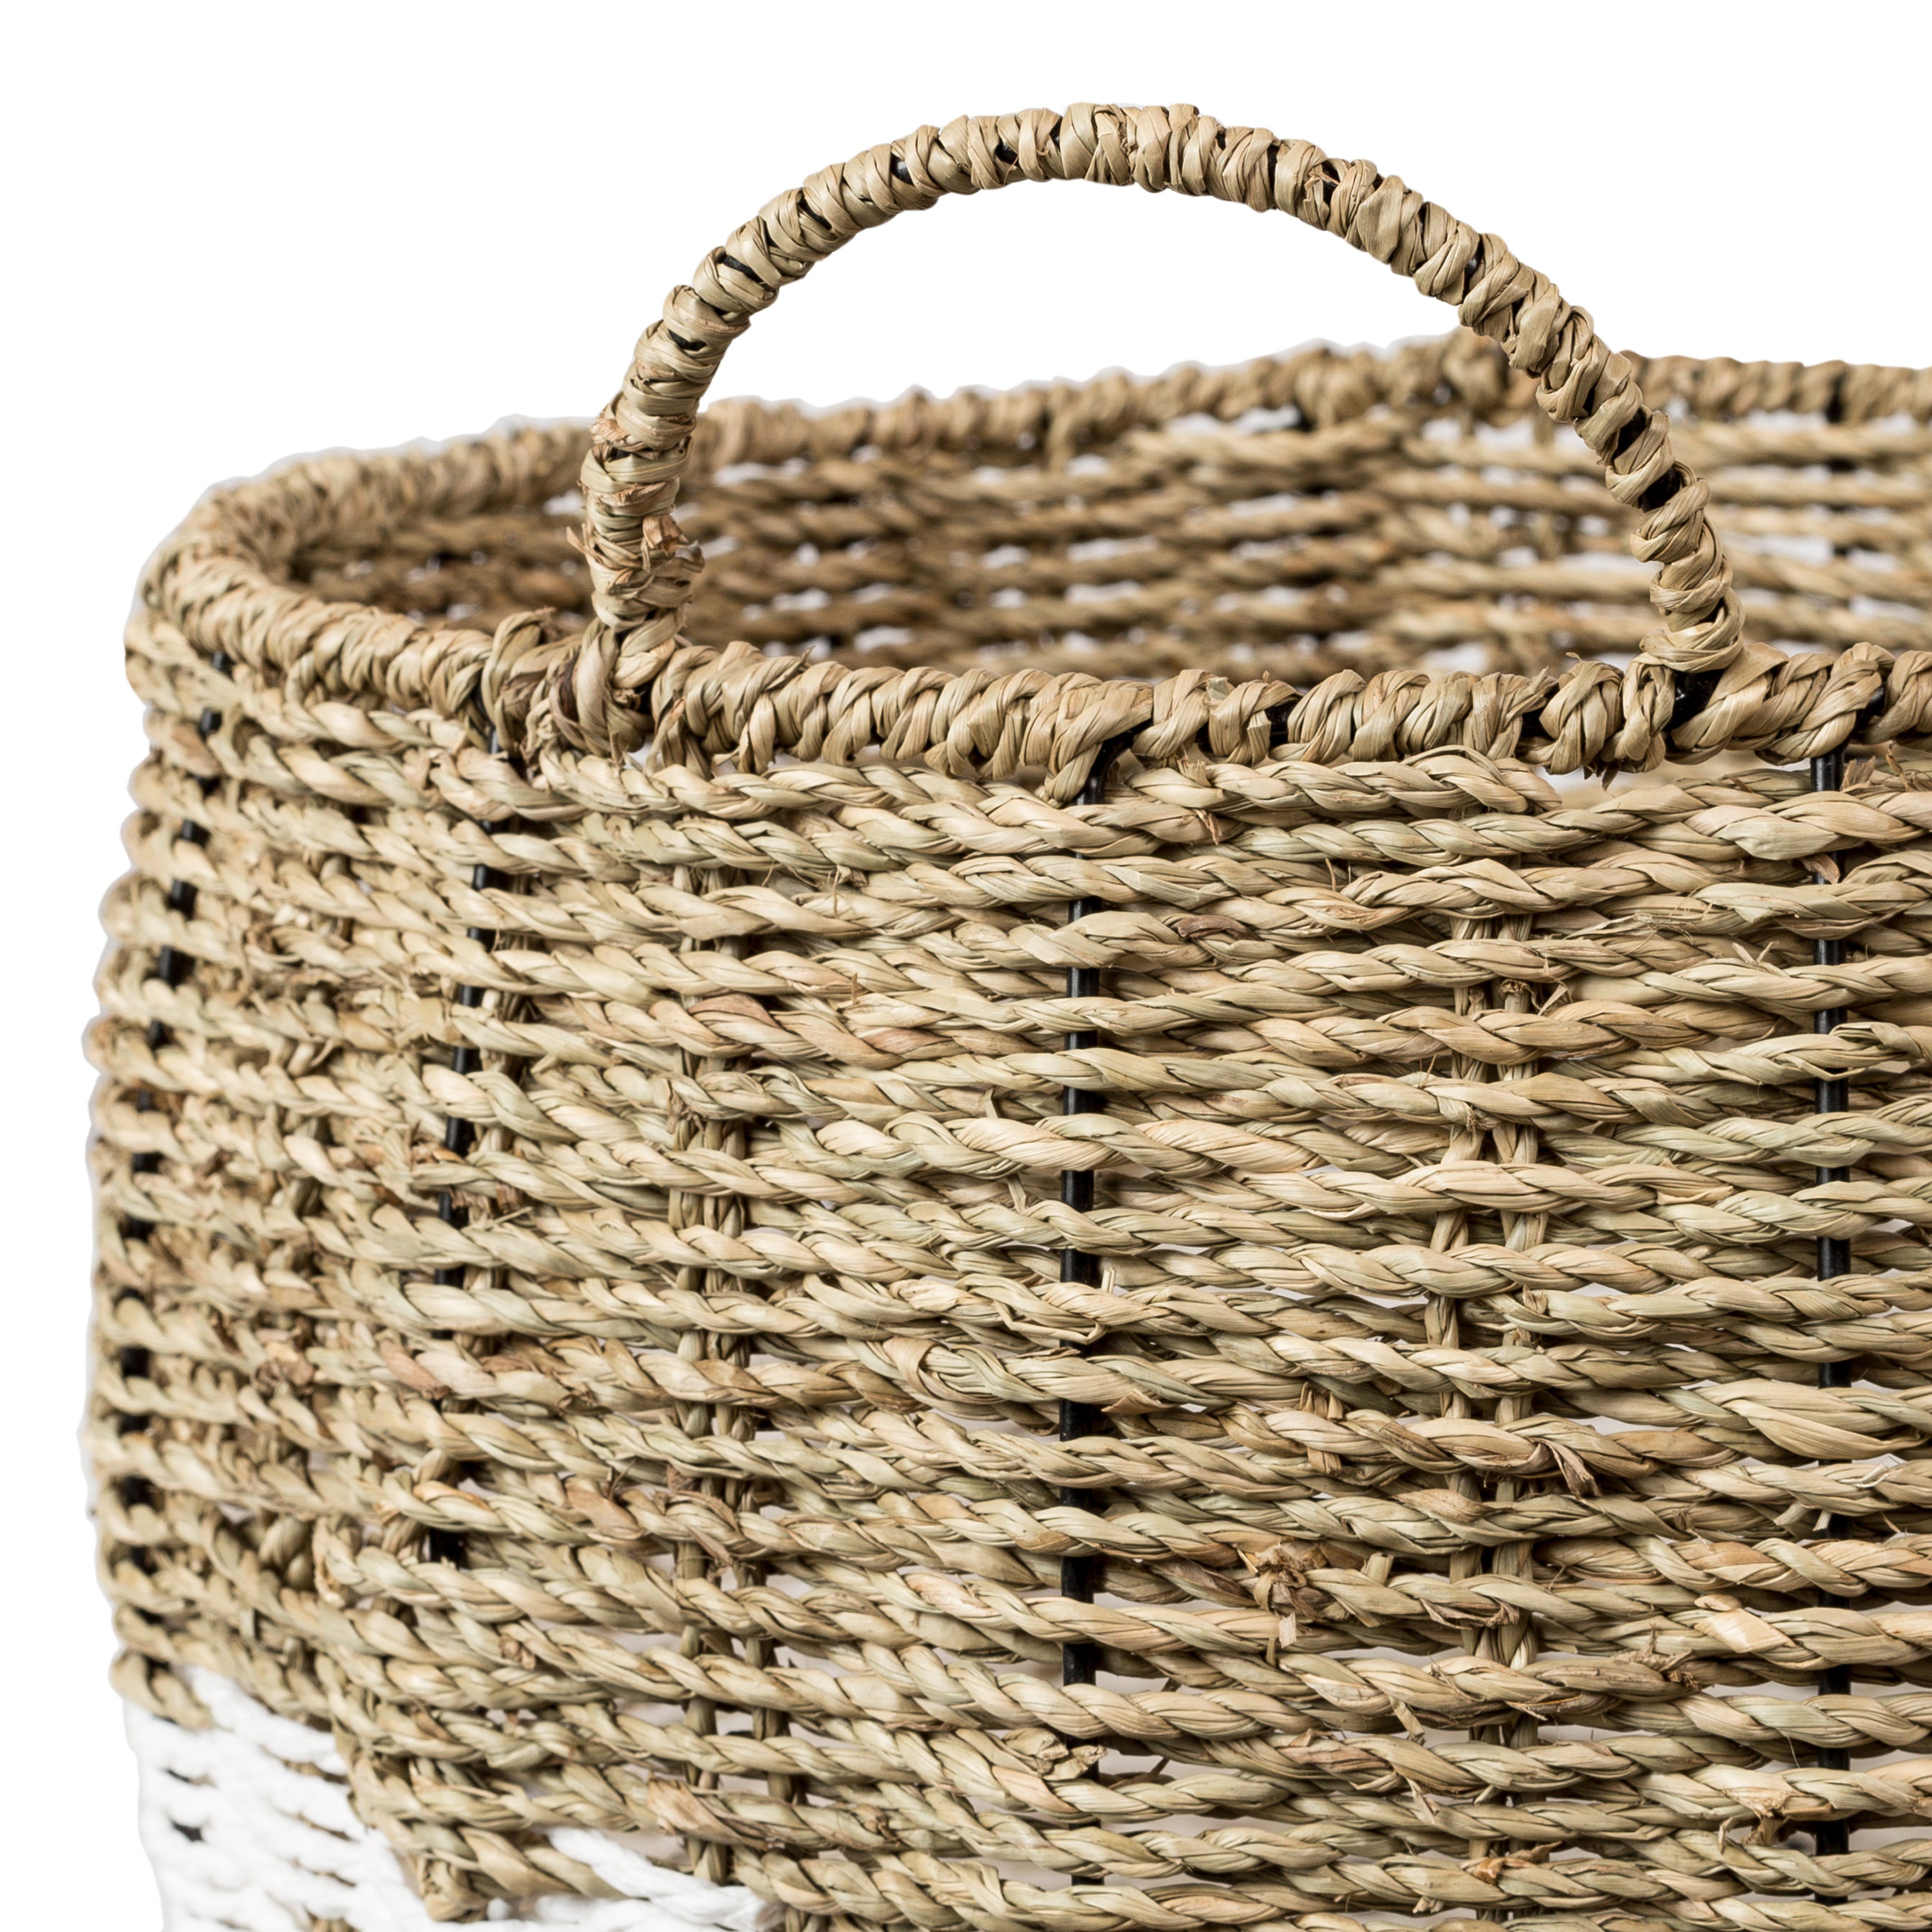 Explore our White/Natural Seagrass Round Nesting Baskets (Set of 3)  honeycando.com Cheap, Discount Online collection and be inspired. Get them  now